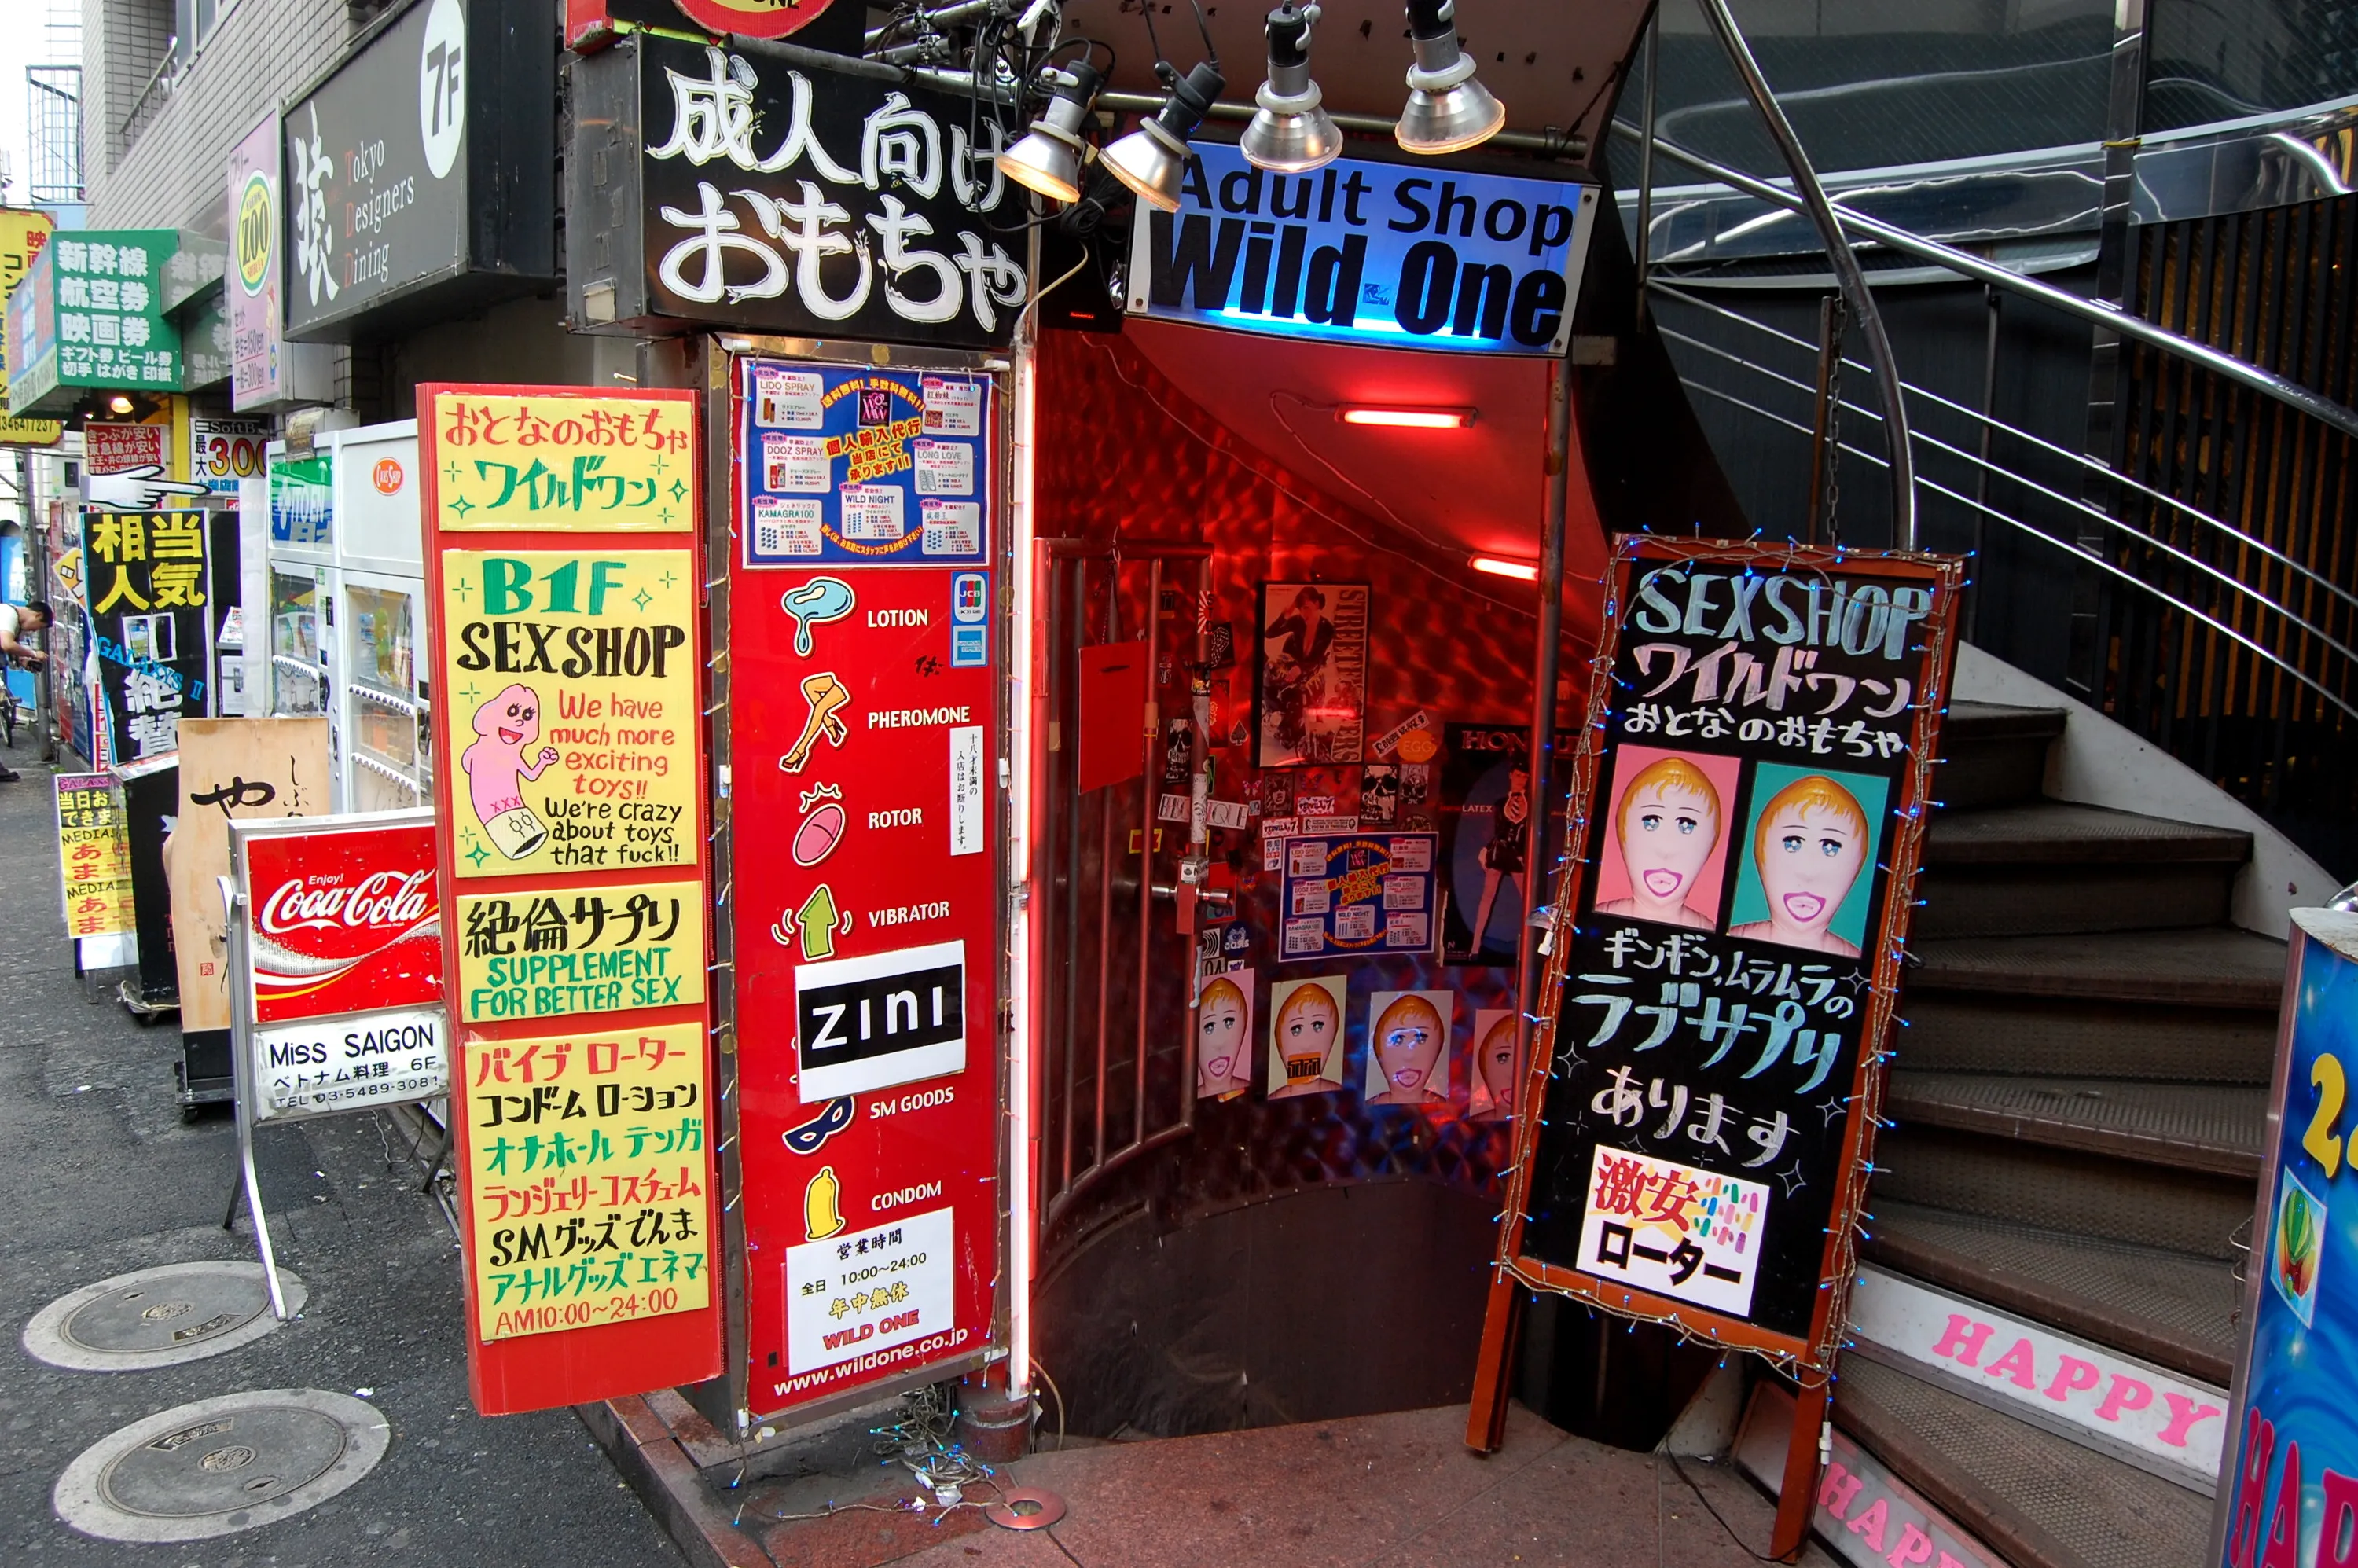 Wild One in Japan, east_asia | Sex Products - Rated 4.3